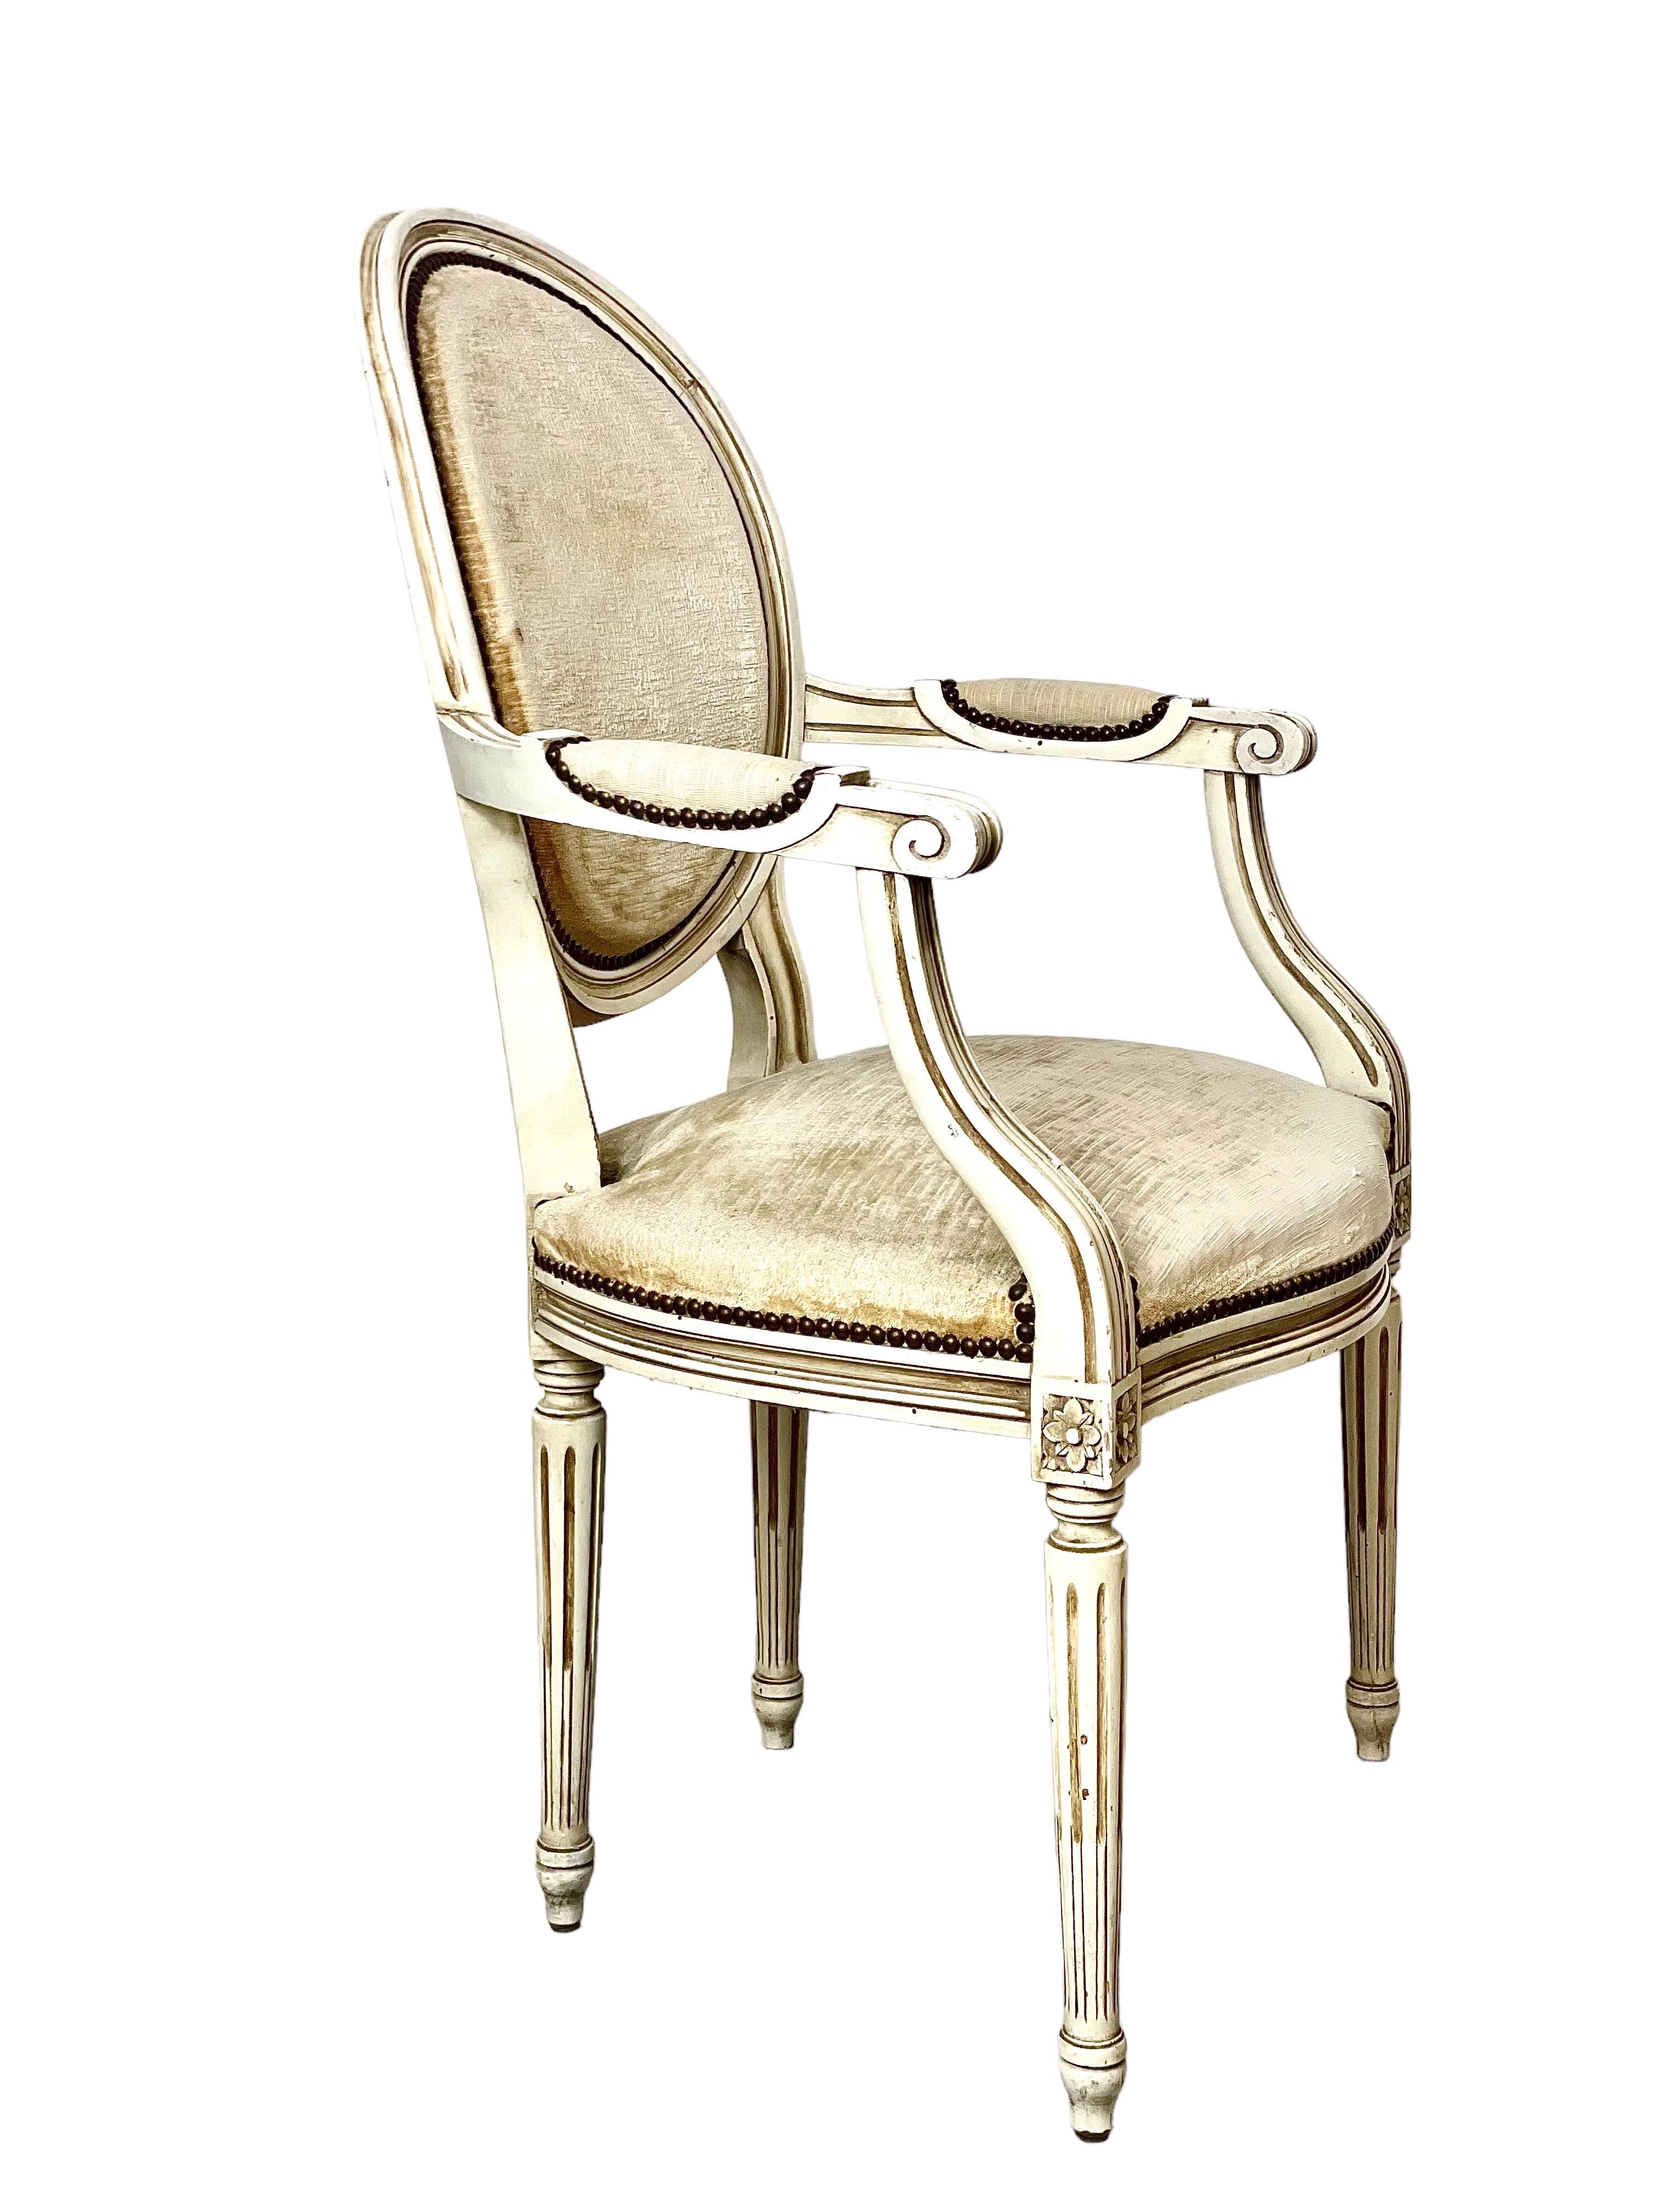 A pair of medallion-backed Louis XVI-style 'Fauteuil Cabriolet' armchairs, in white lacquered wood, and upholstered in creamy velvet. These chairs are wonderfully aged, with an authentic patina, and have the comfortable curved back of the classic